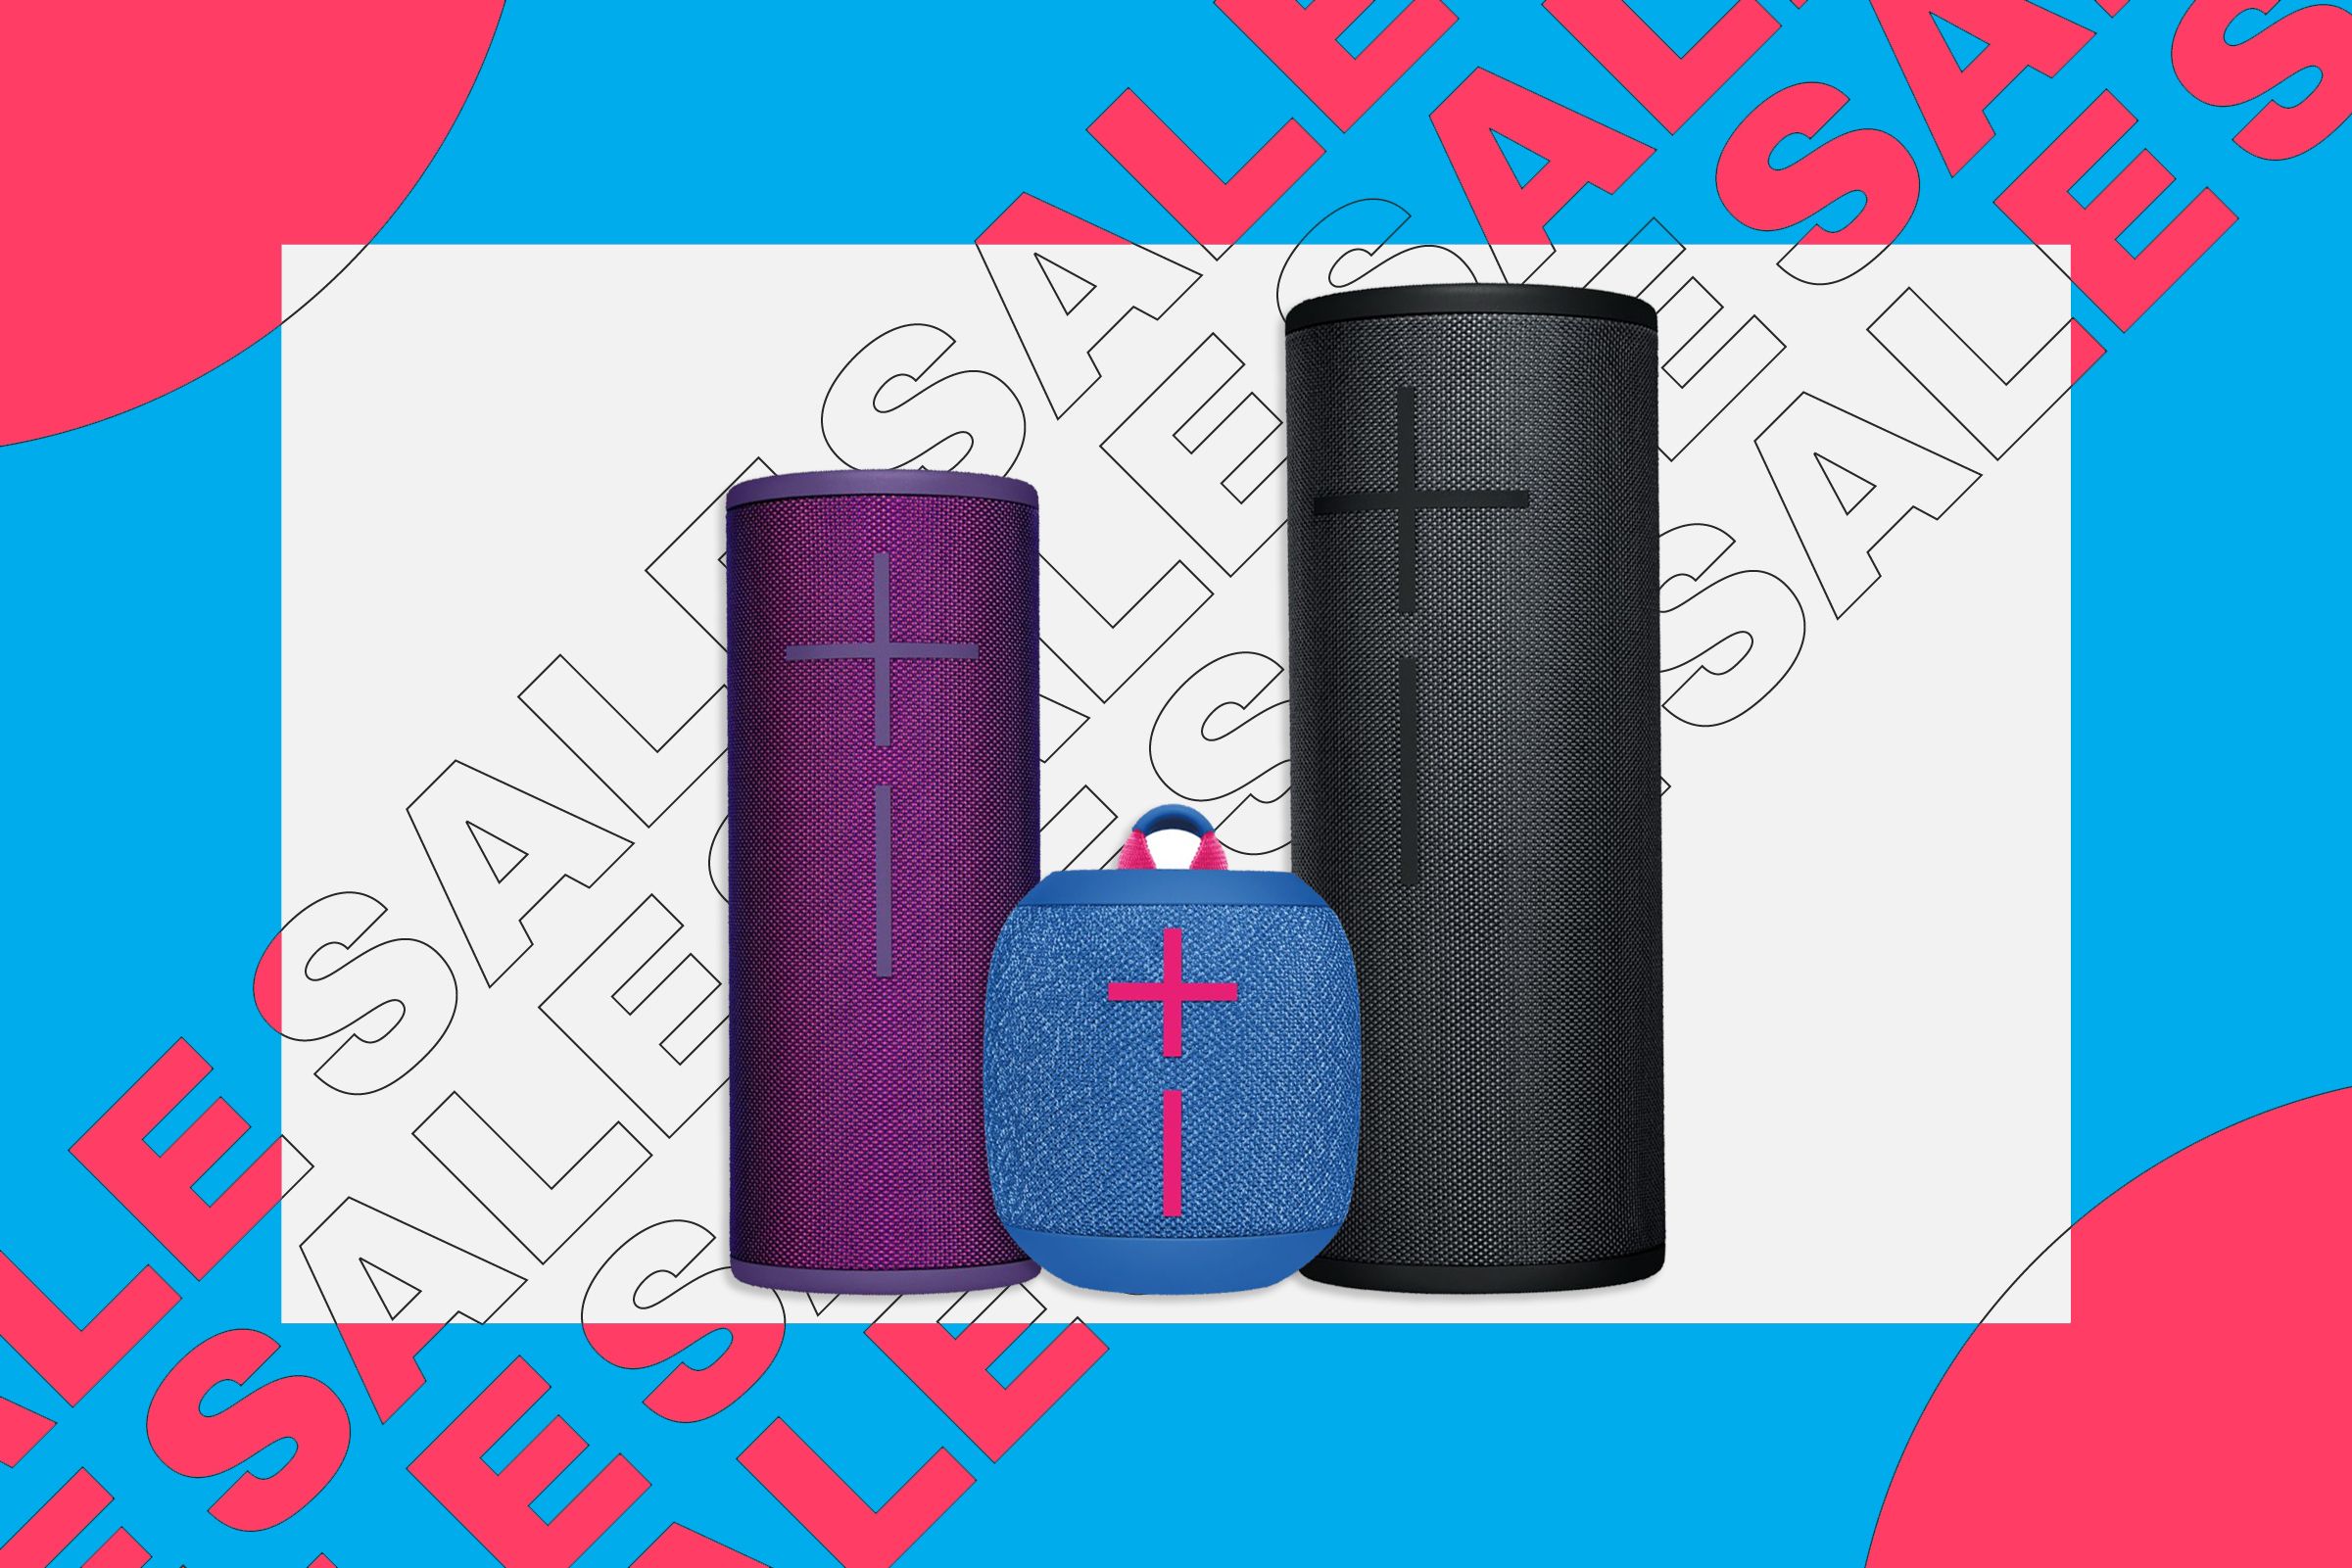 Ultimate Ears portable speakers with sale illustration in the background.